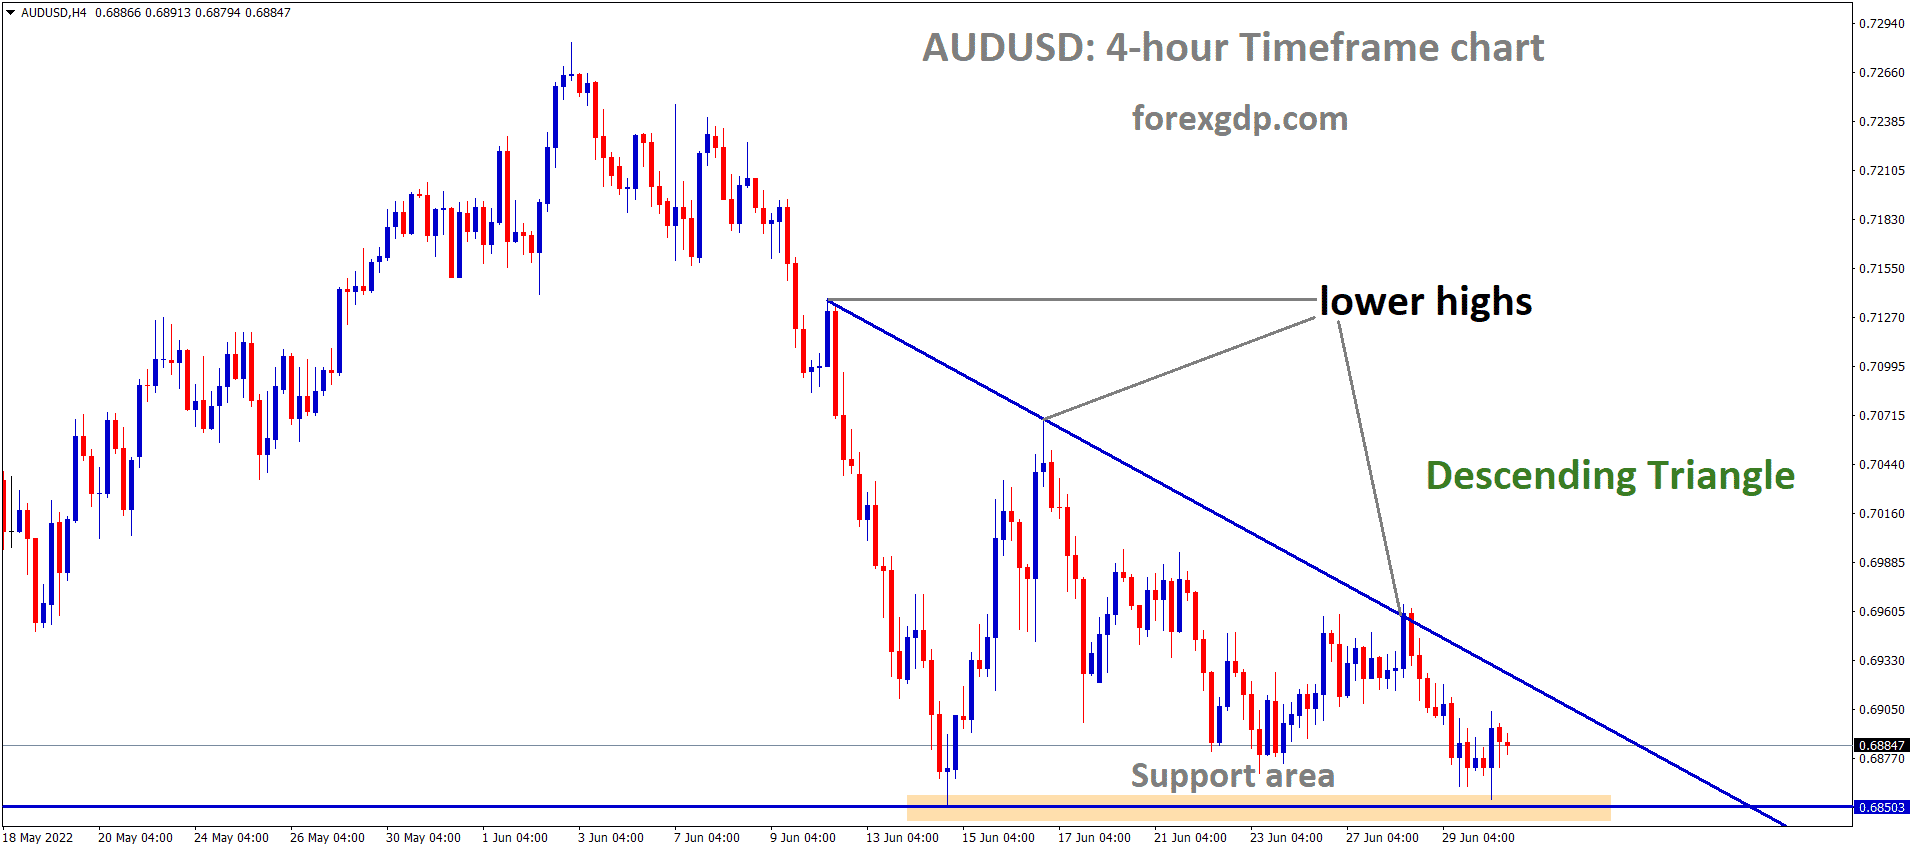 AUDUSD is moving in the Descending triangle pattern and the Market has rebounded from the horizontal support area of the Pattern.